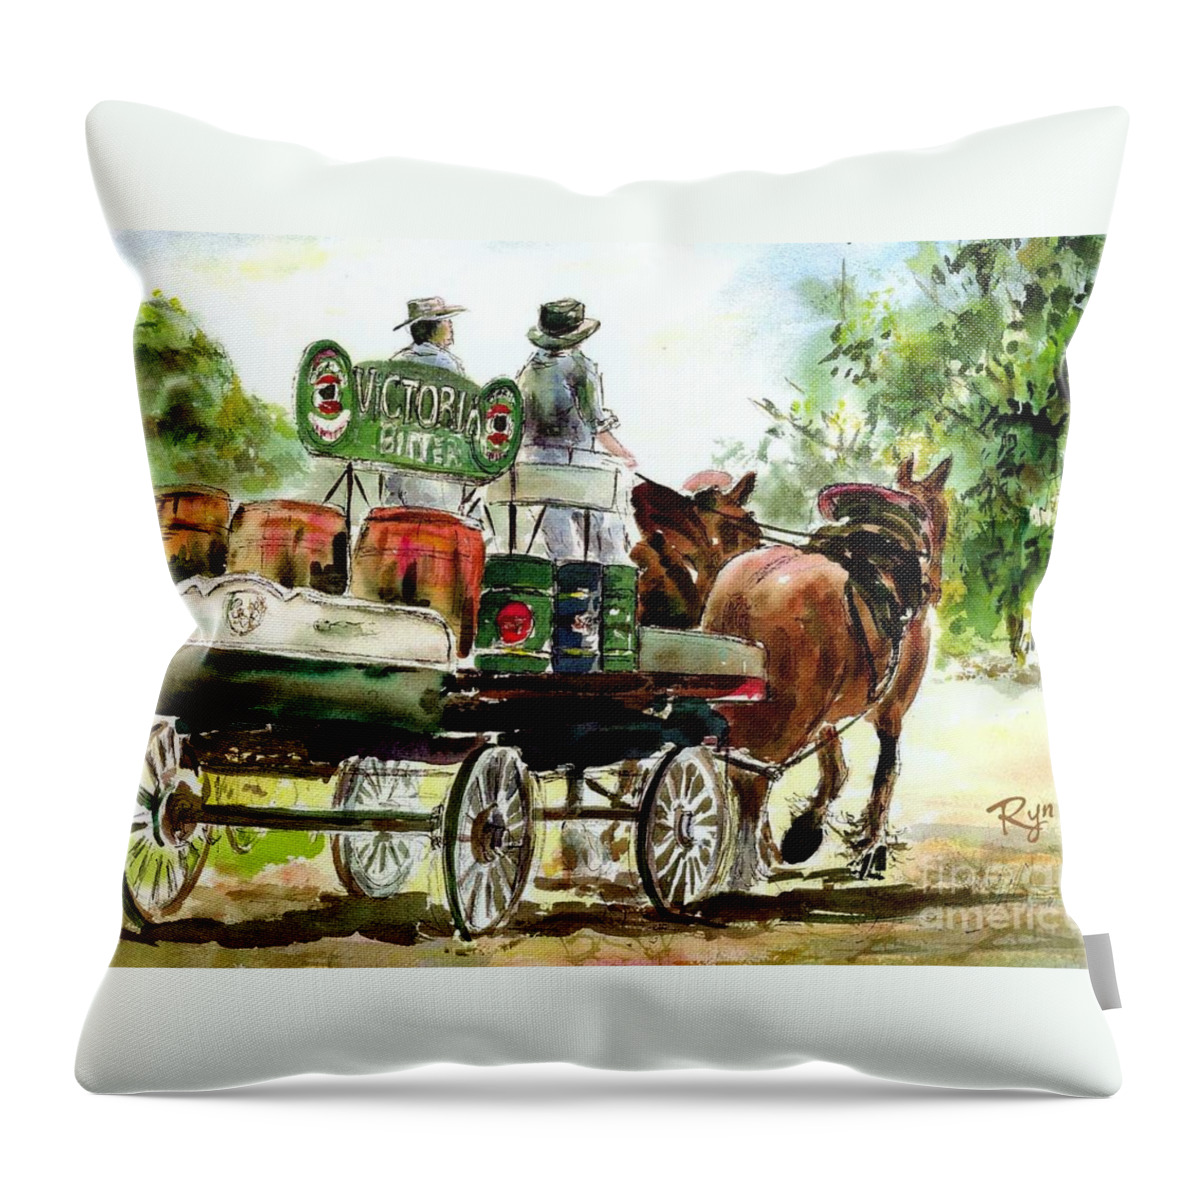 Clydesdale Throw Pillow featuring the painting Victoria Bitter, Working Clydesdales. by Ryn Shell